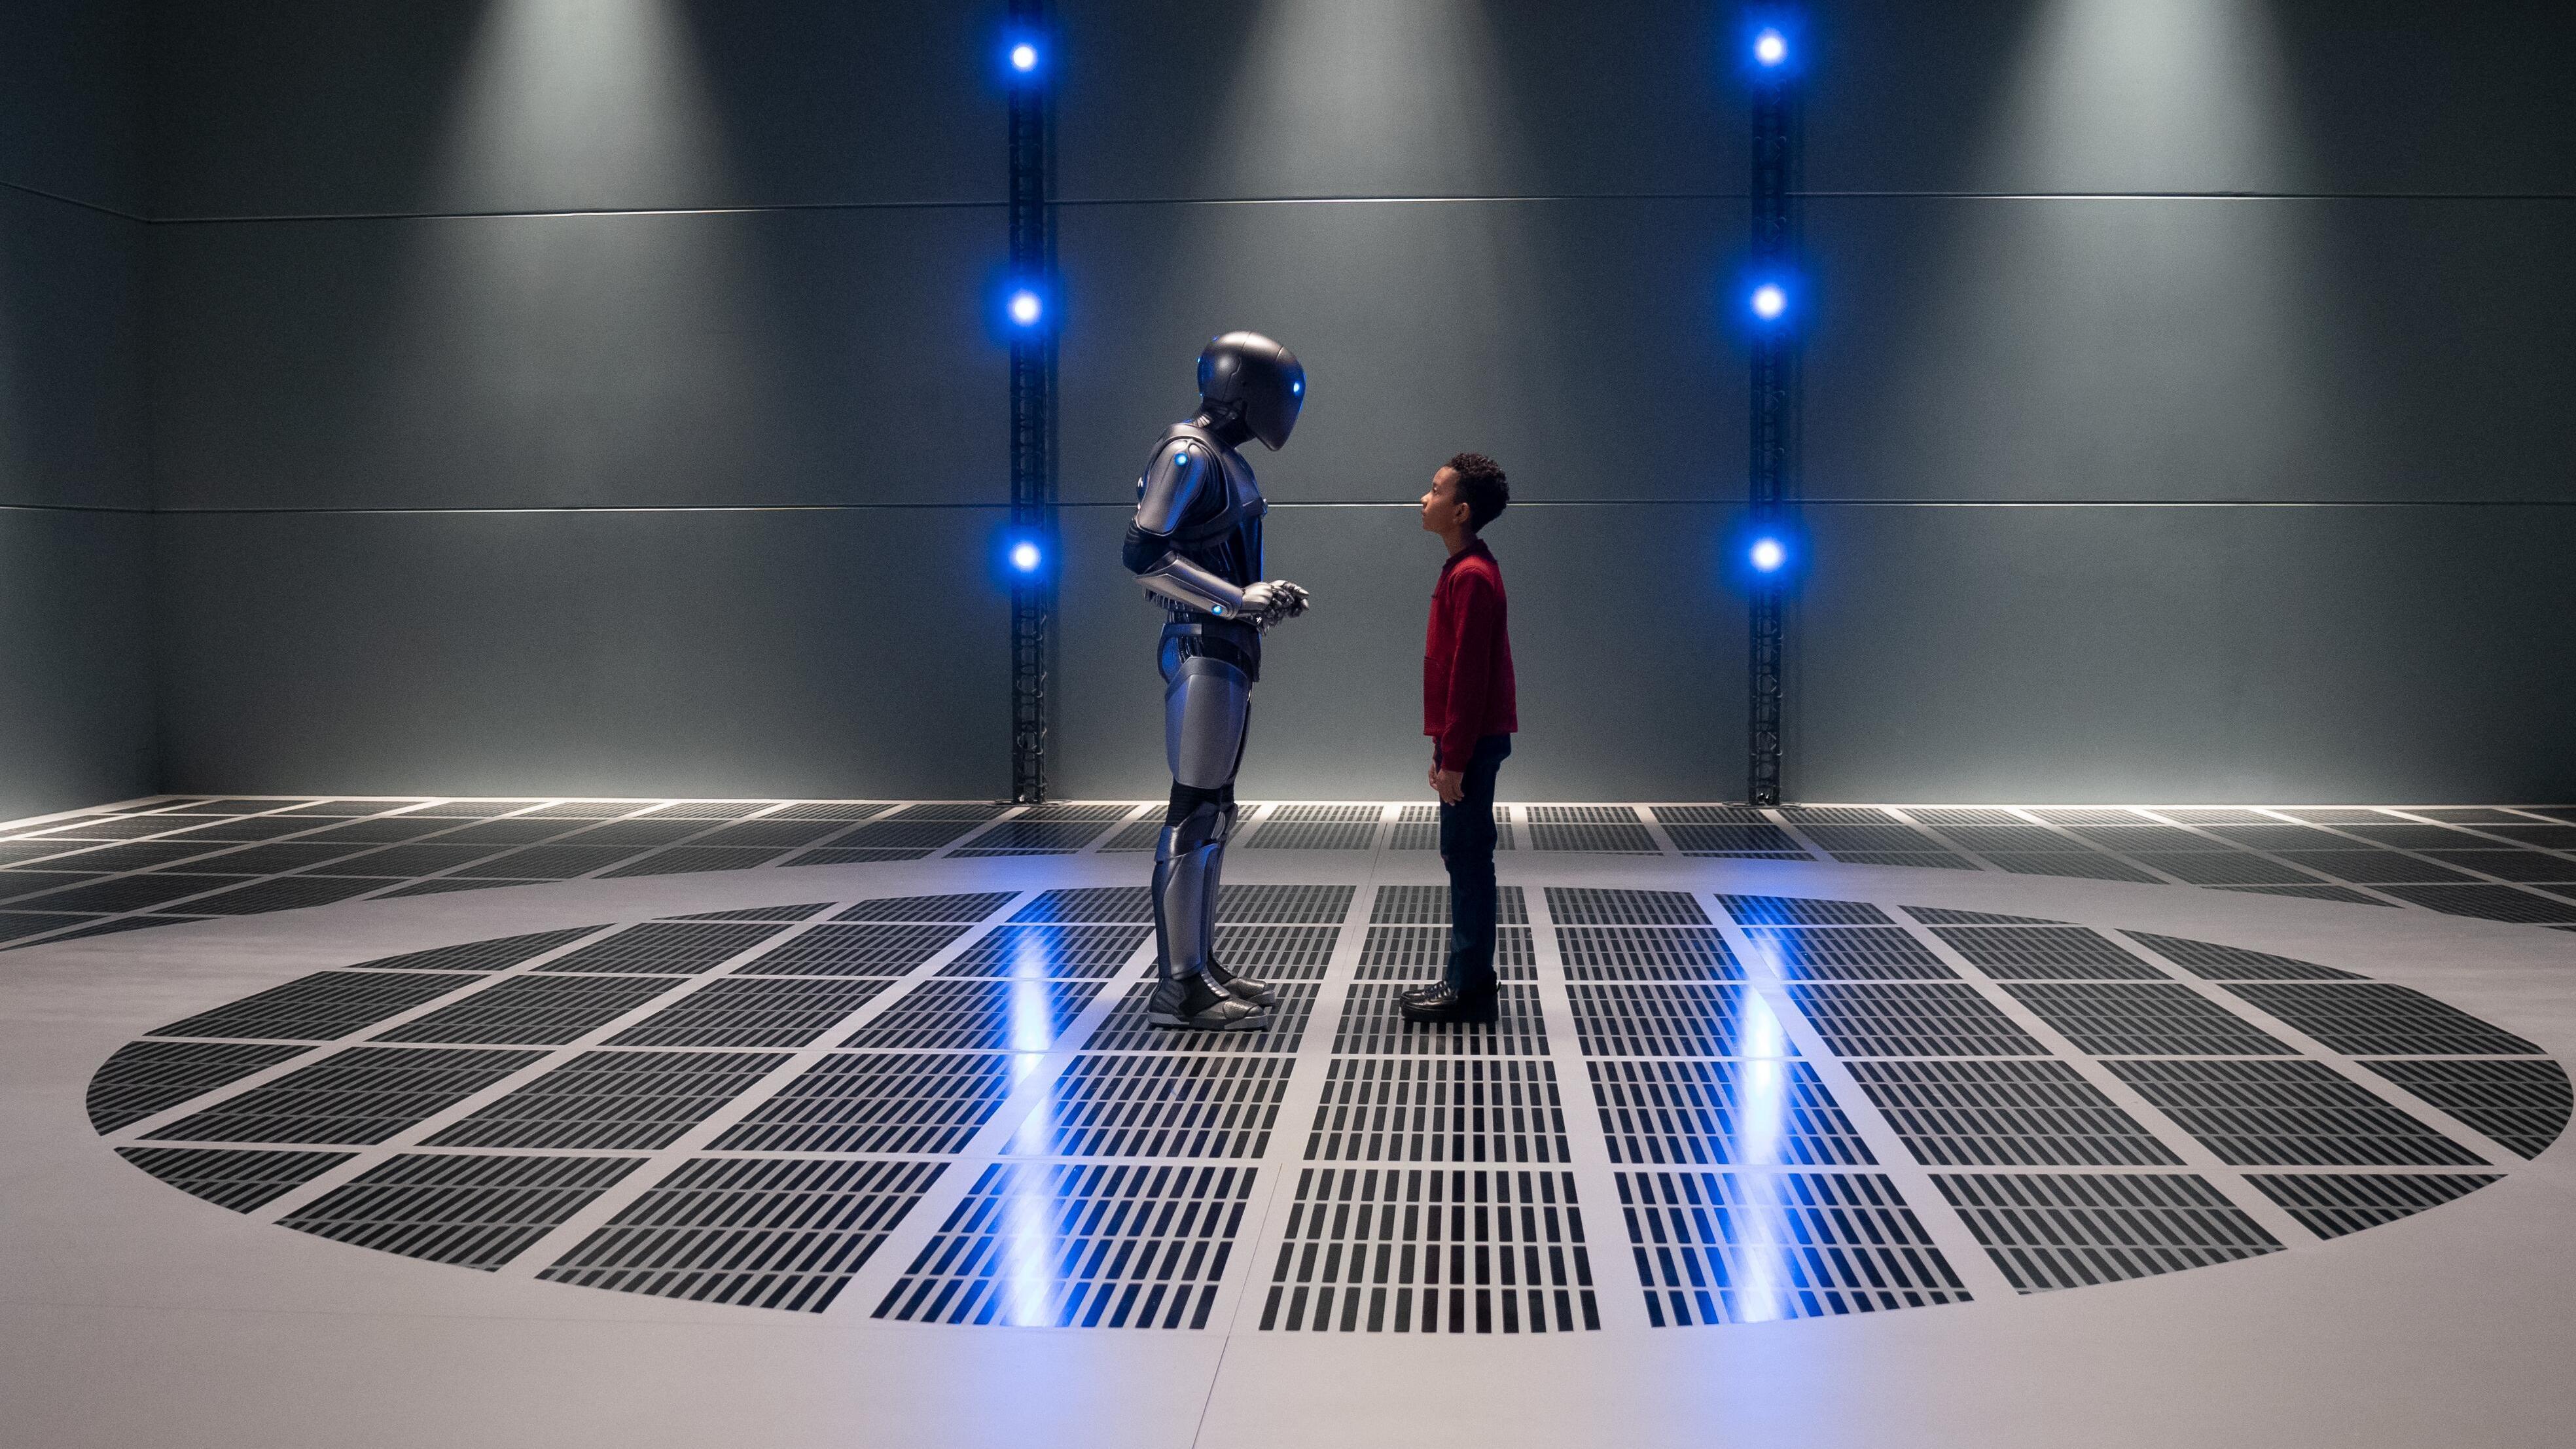 The Orville: New Horizons -- “Electric Sheep” - Episode 301 - The Orville crew deals with the interpersonal aftermath of the battle against the Kaylon on the season three premiere of “The Orville: New Horizons”. Isaac (Mark Jackson) and Ty Finn (Kai Wener), shown. (Photo by: Michael Desmond/Hulu)